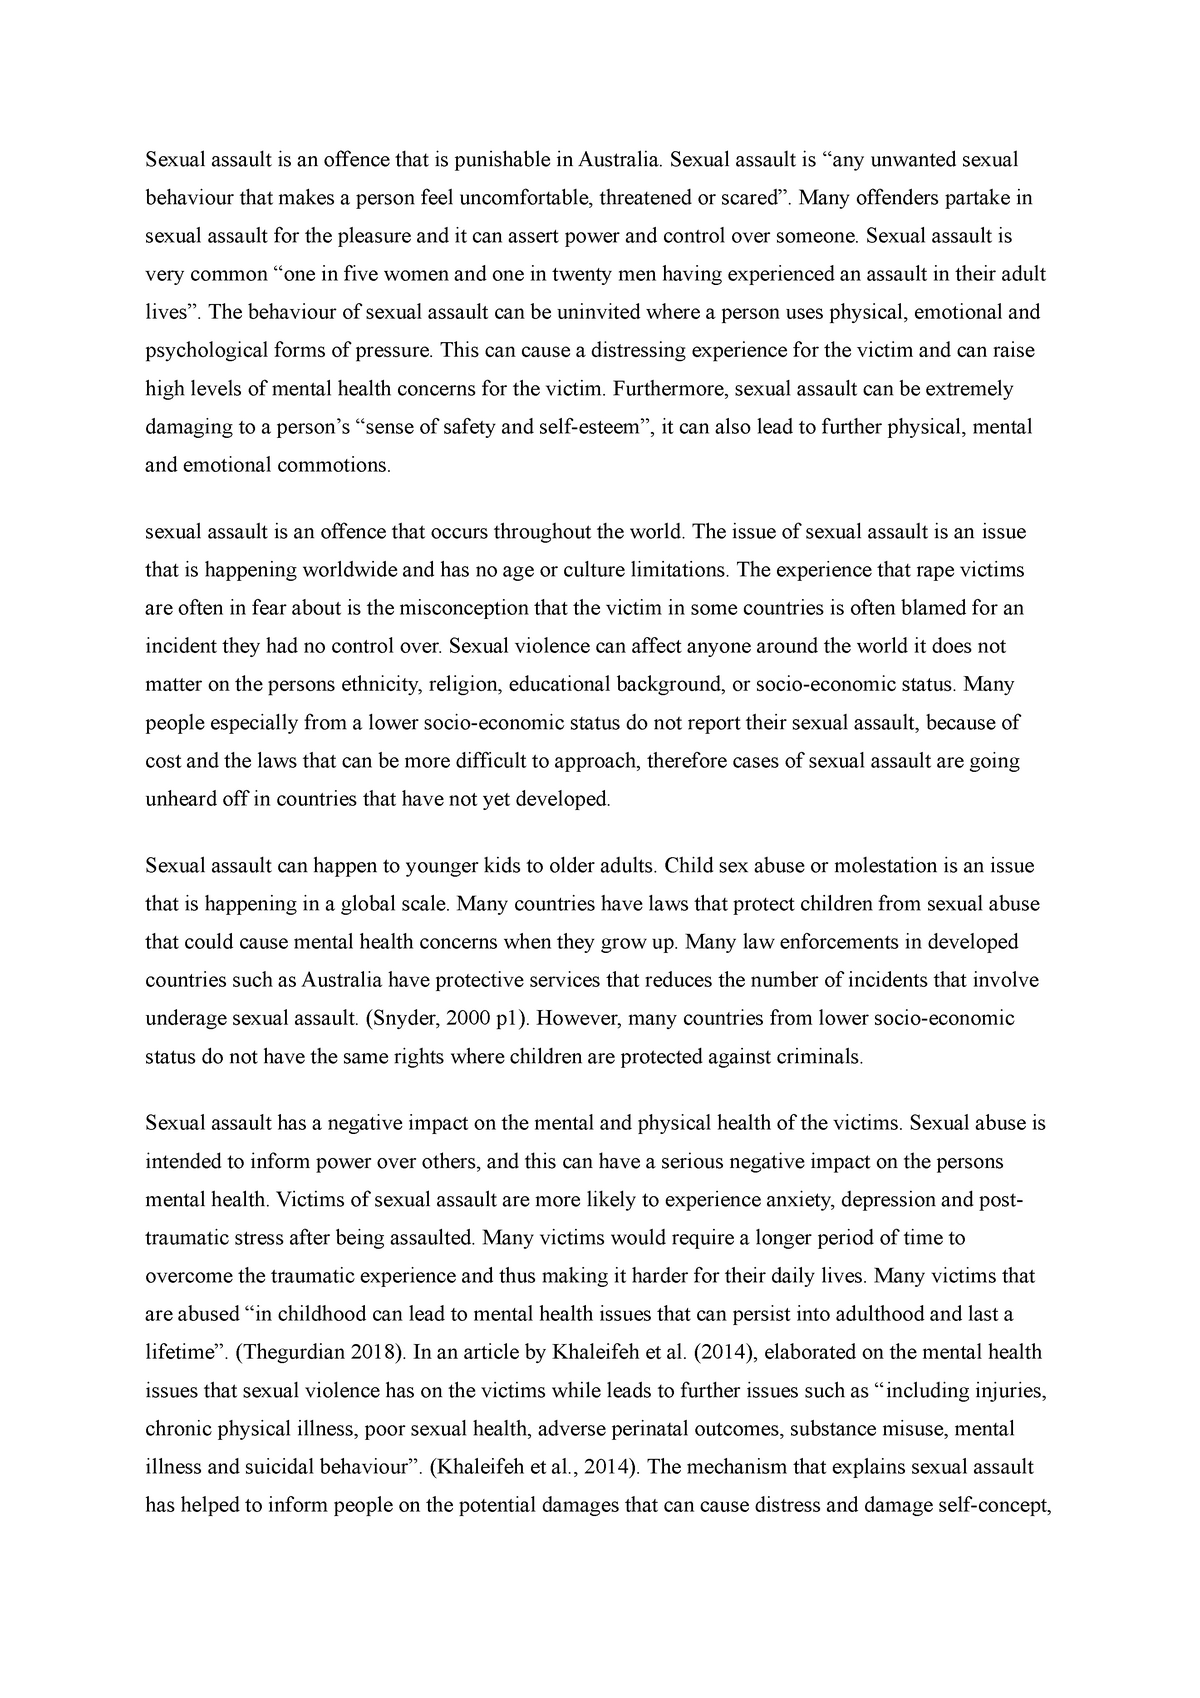 essay about sex abuse